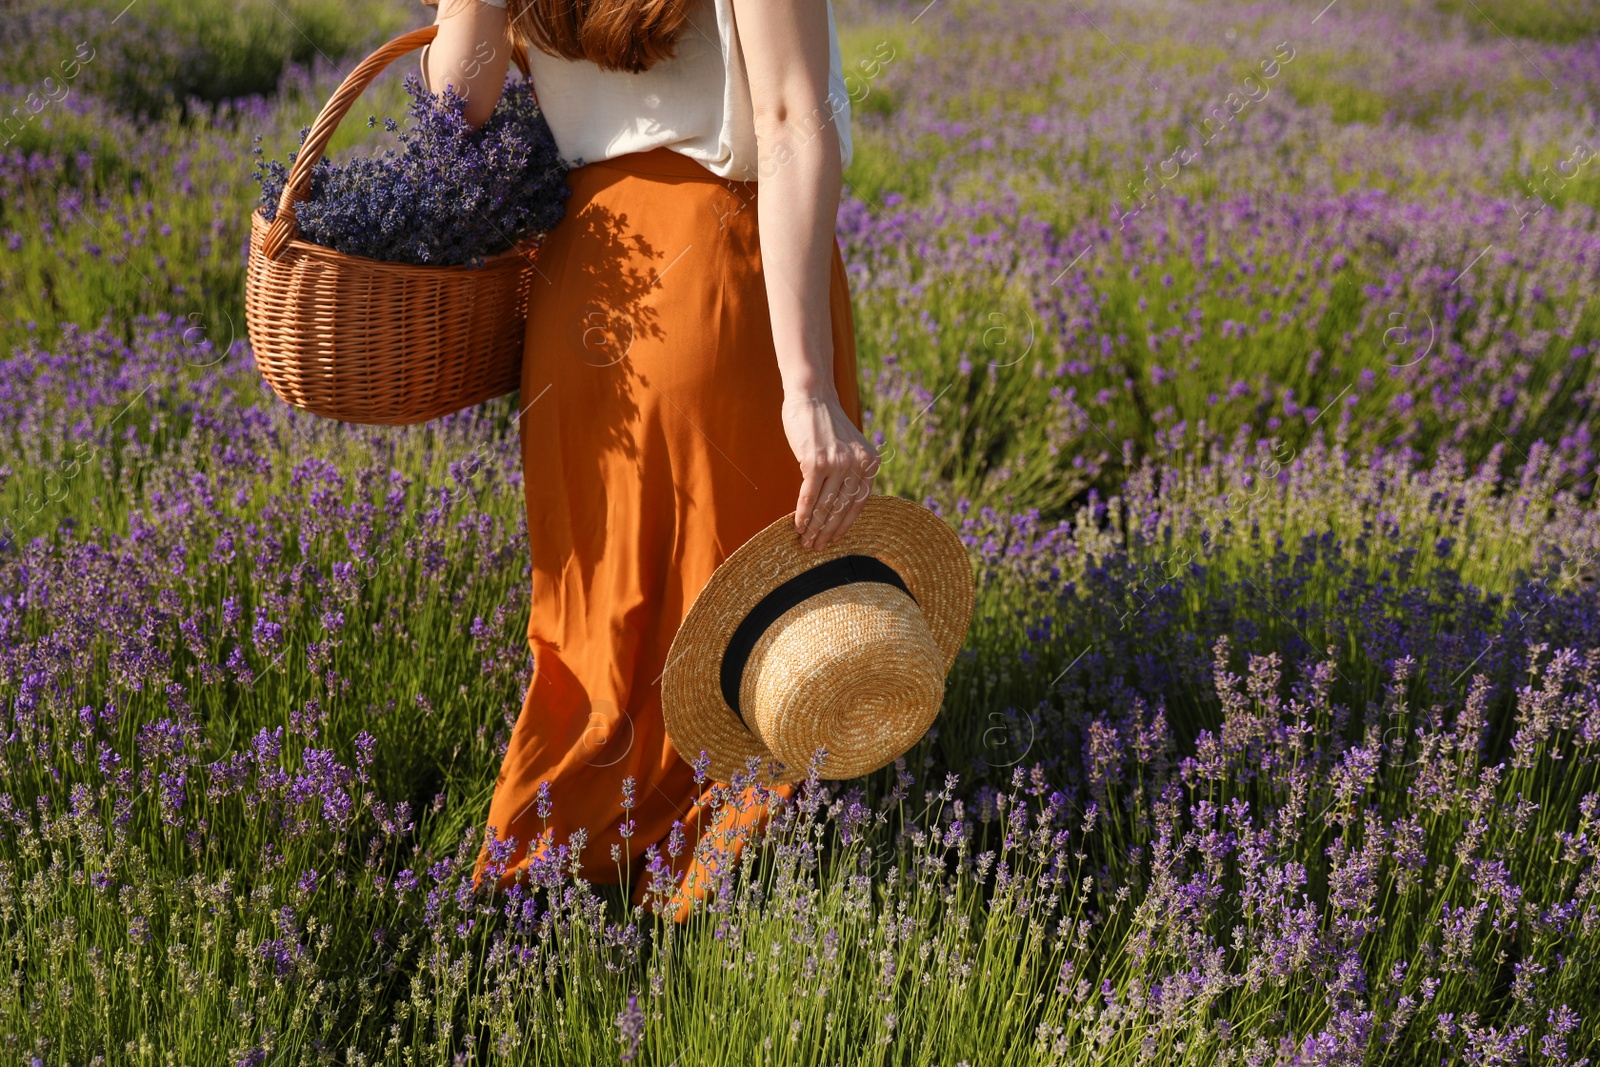 Photo of Young woman with straw hat and wicker basket full of lavender flowers in field, closeup